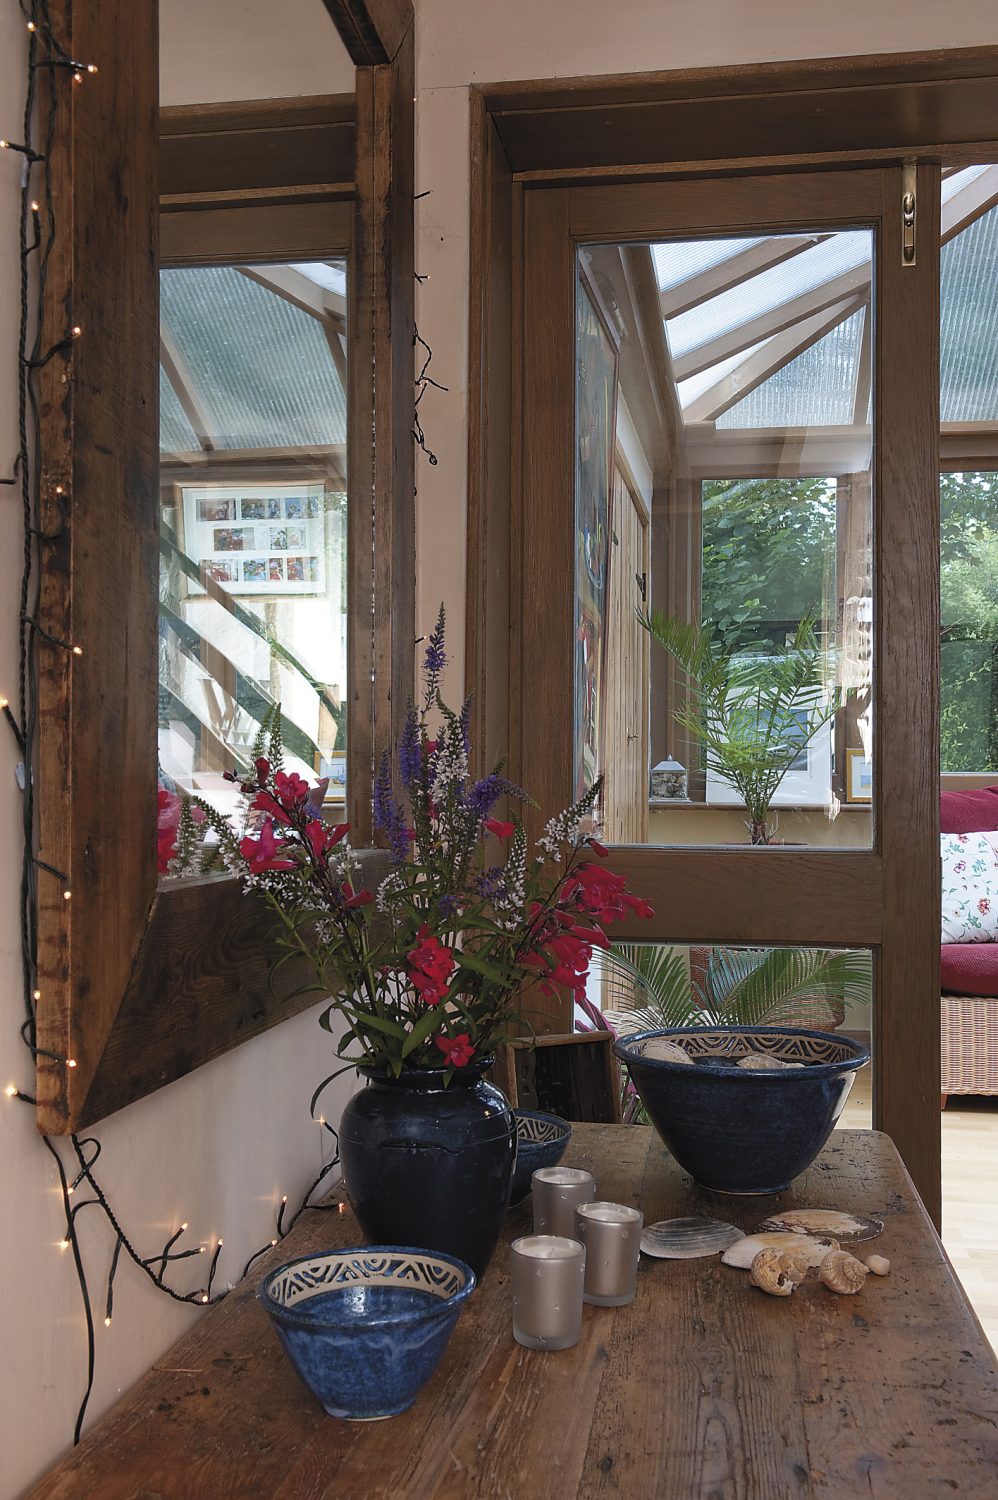 the Wildings added the delightful conservatory which is Christine’s favourite summer spot, where she will sit with a cup of tea, a good book and one of the cats!